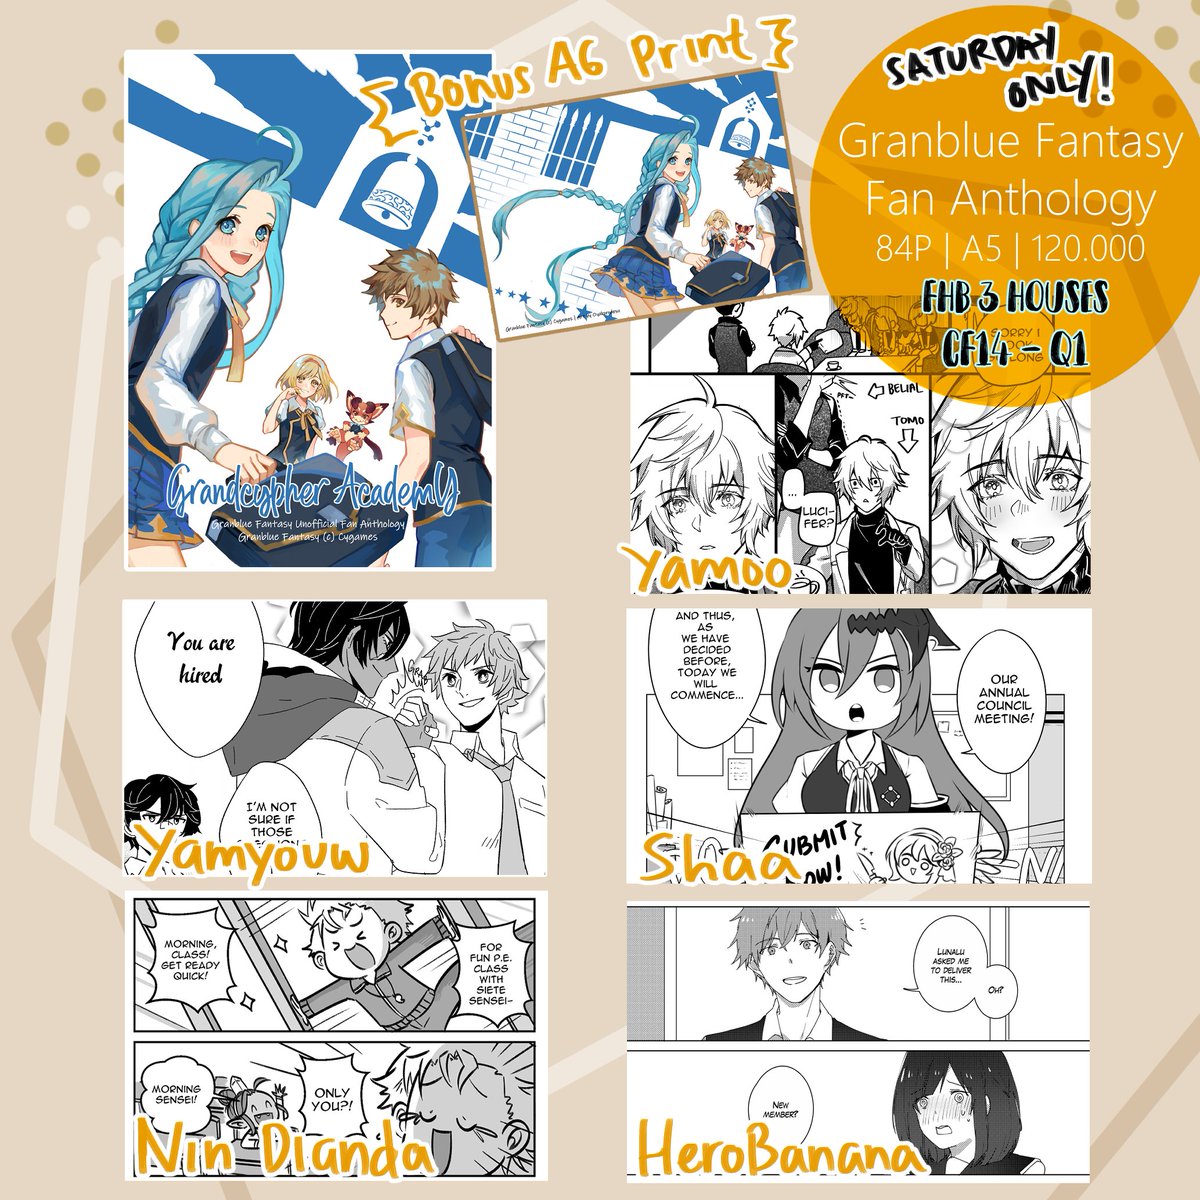 ALSO
"Grandcypher Academy", a GBF fan anthology by @sashacall @Yamyouw @herochii_banana @nindianda @Oyakorodesu 
It's a Highschool AU where everything stupidly fun ww
only available at saturday at the mentioned booth, if there's any leftover on sunday it will be on my booth ovo) 